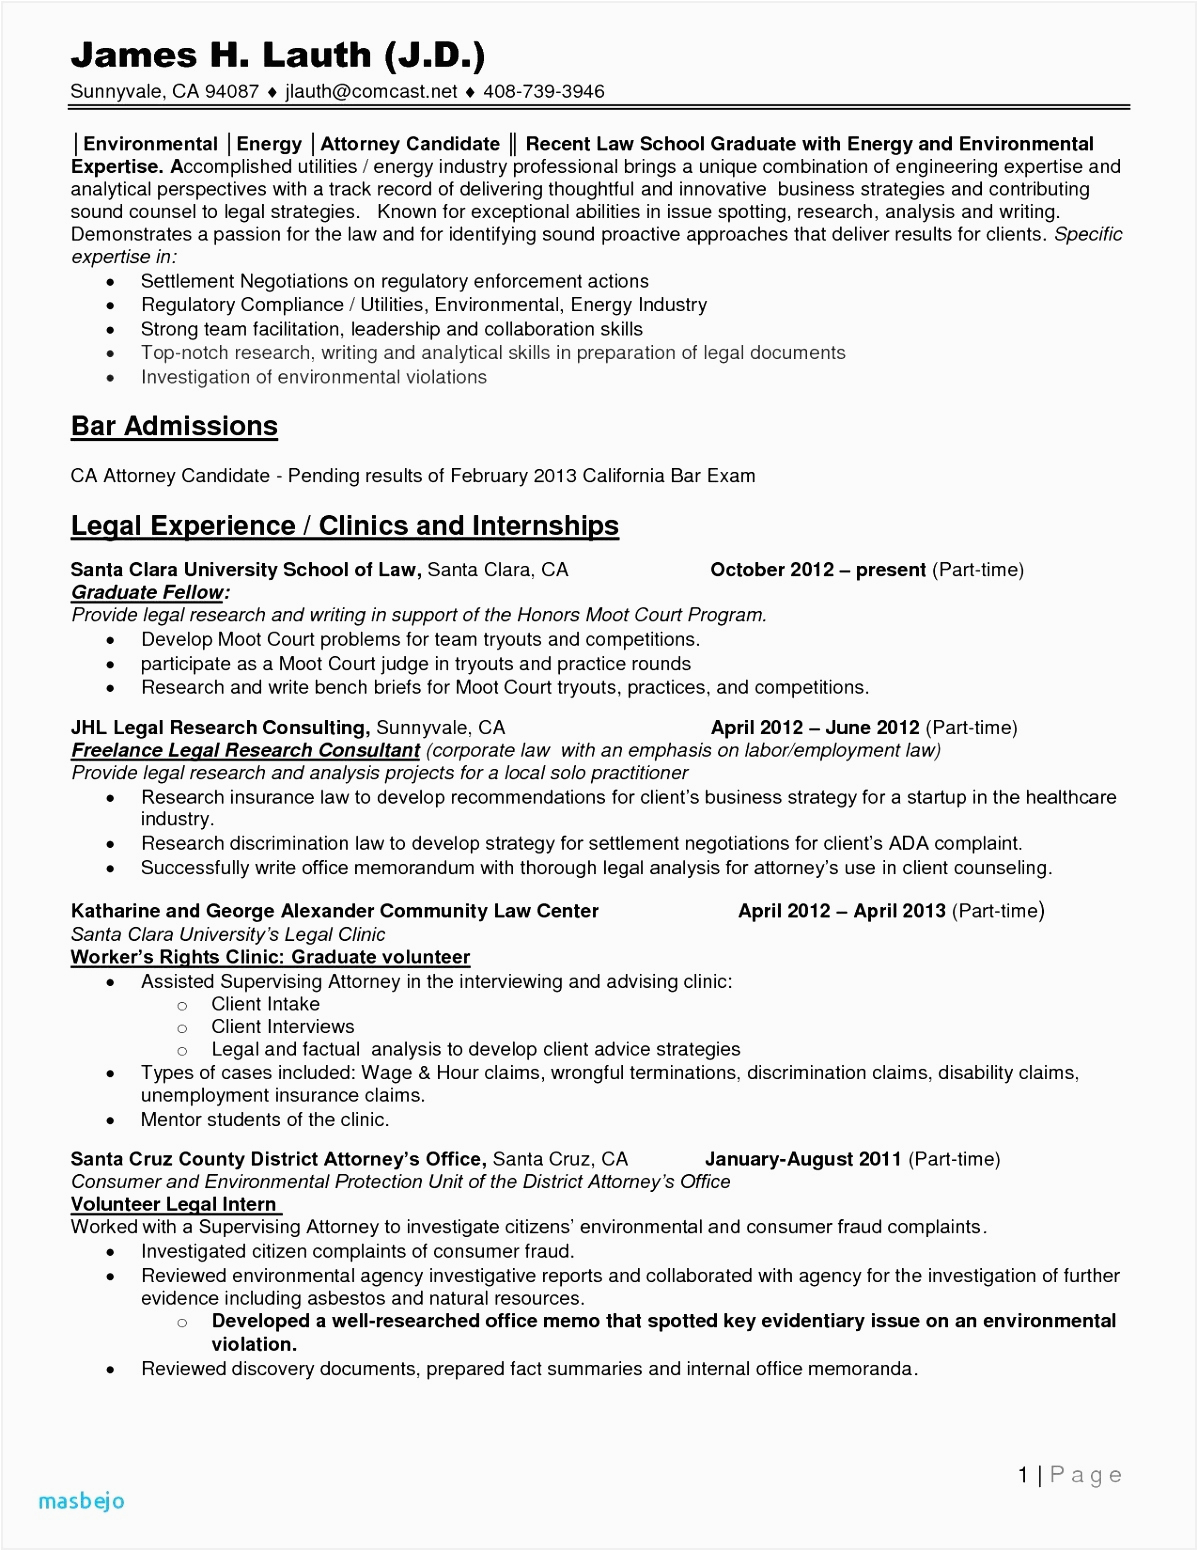 Resume Samples for Client Intake assistant 7 Trademark attorney Sample Resume Bzjgfl